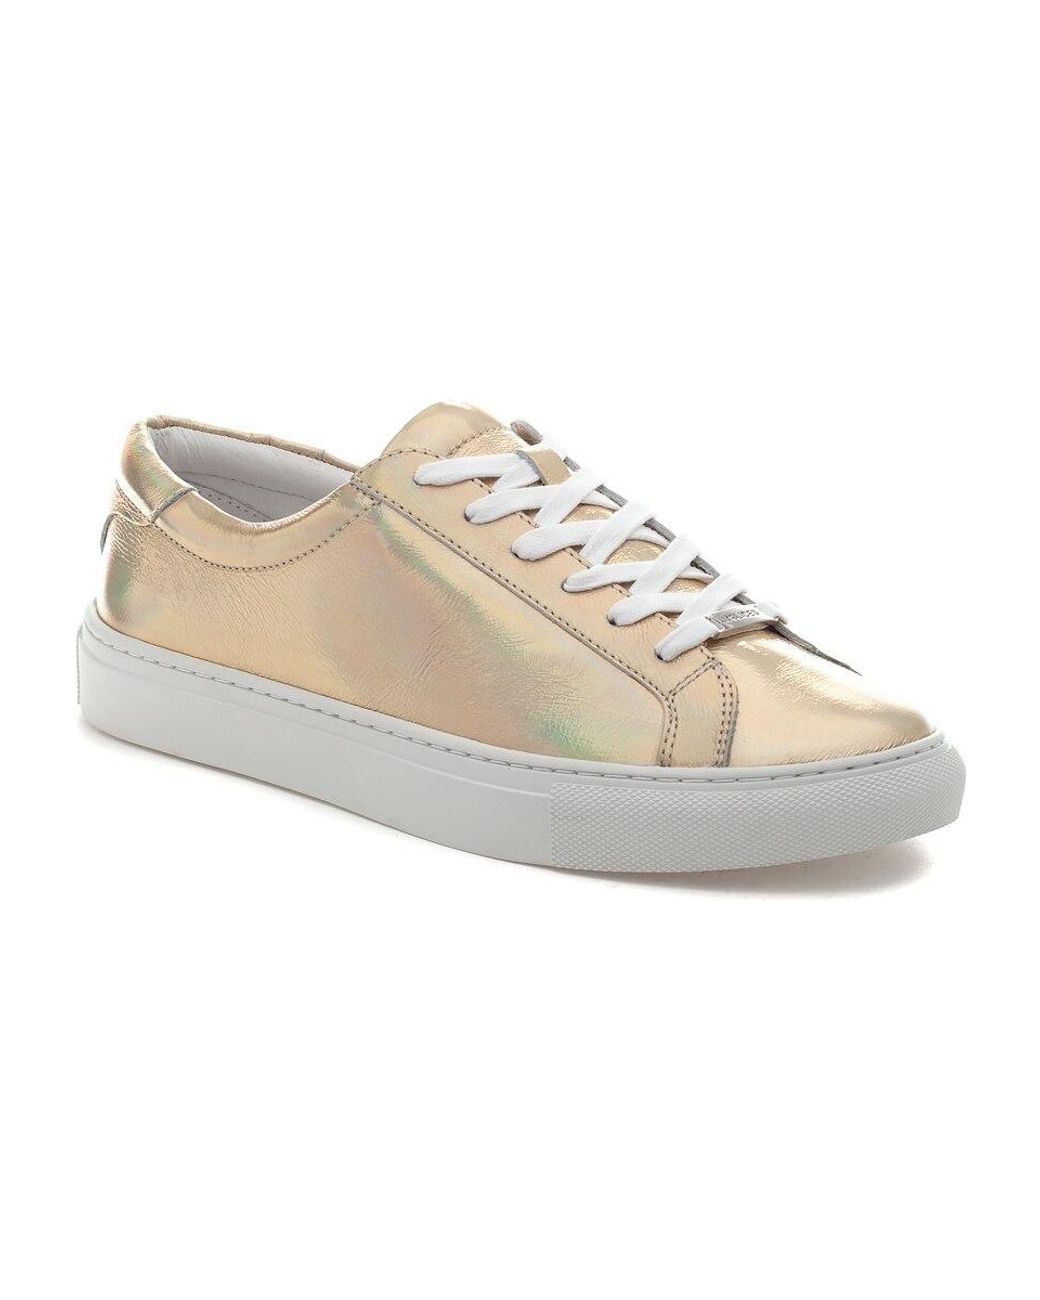 J/Slides Lacee Sneaker Gold Metallic Leather - Lyst